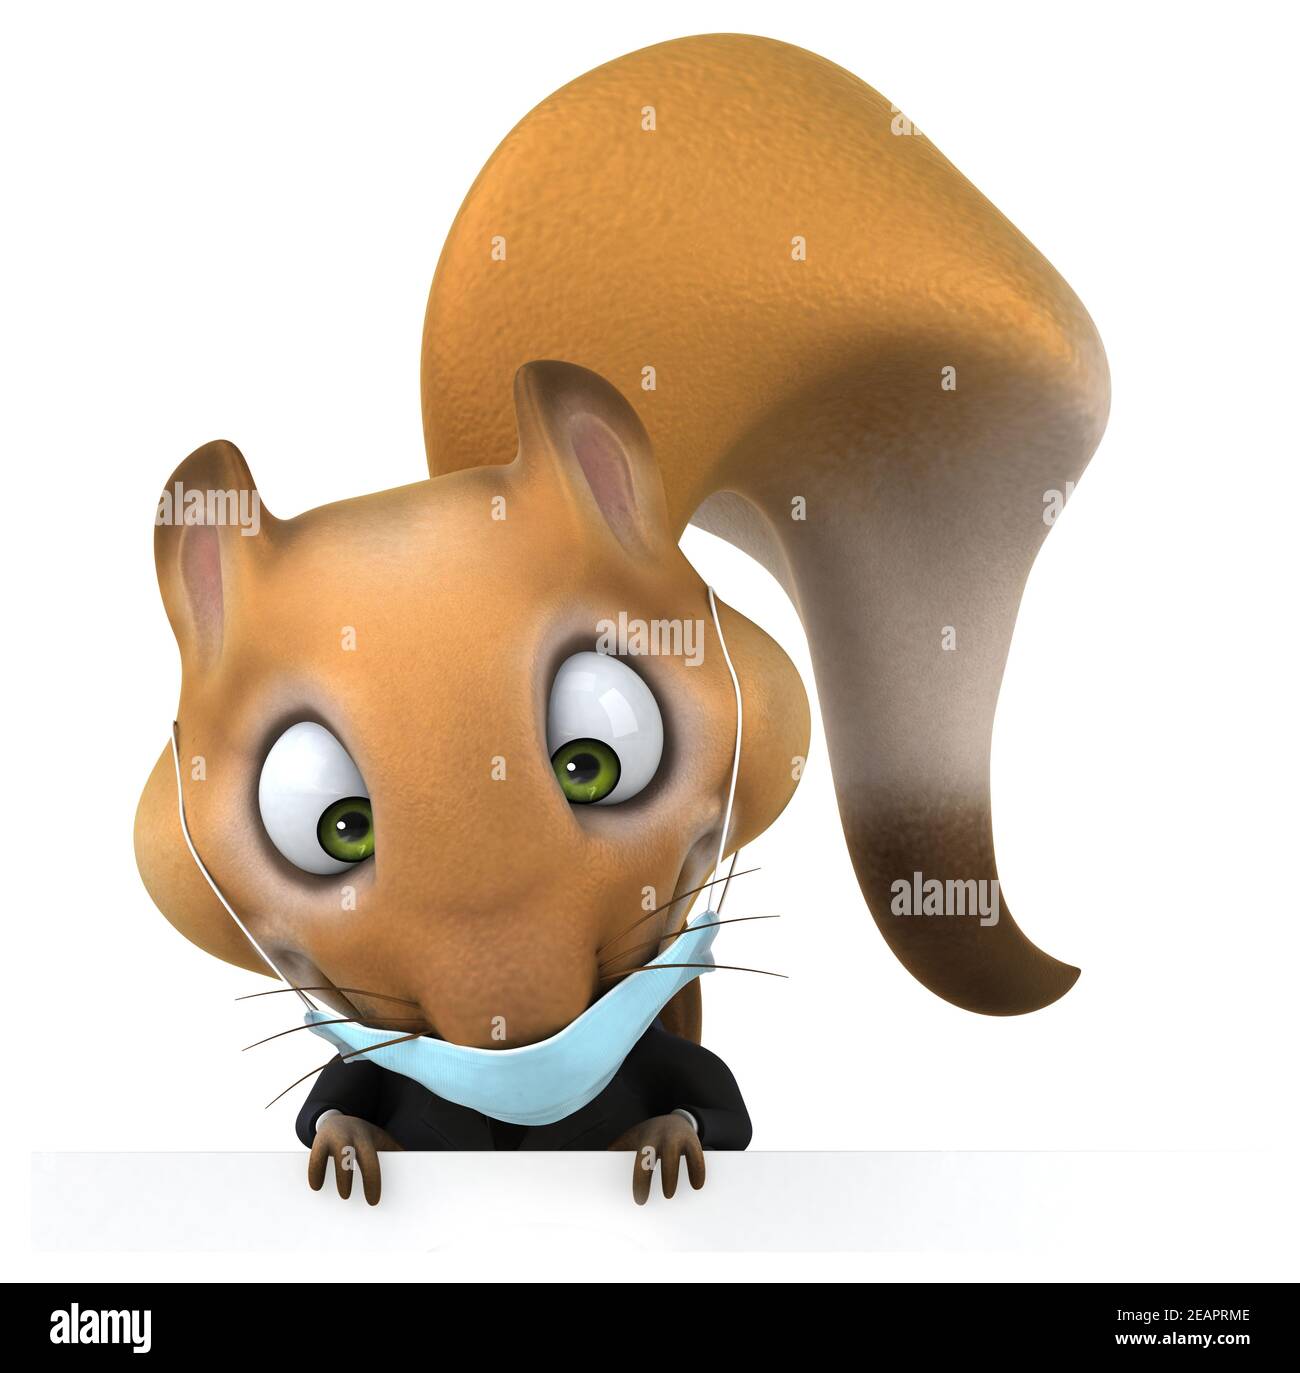 Fun 3D cartoon squirrel with a mask Stock Photo